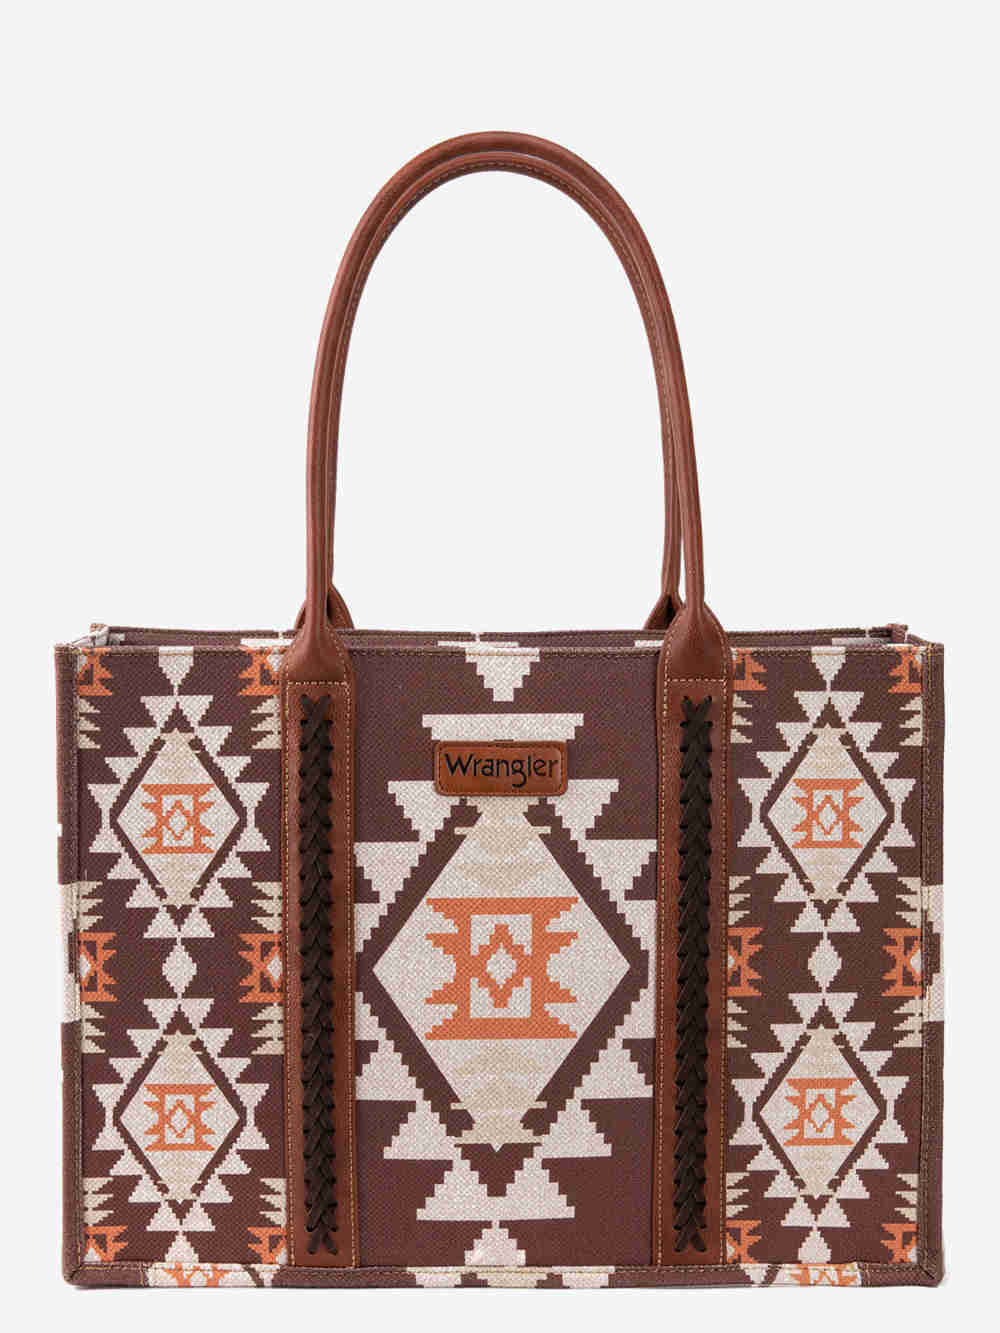 Wrangler Tote Coffee- New Fall Style!